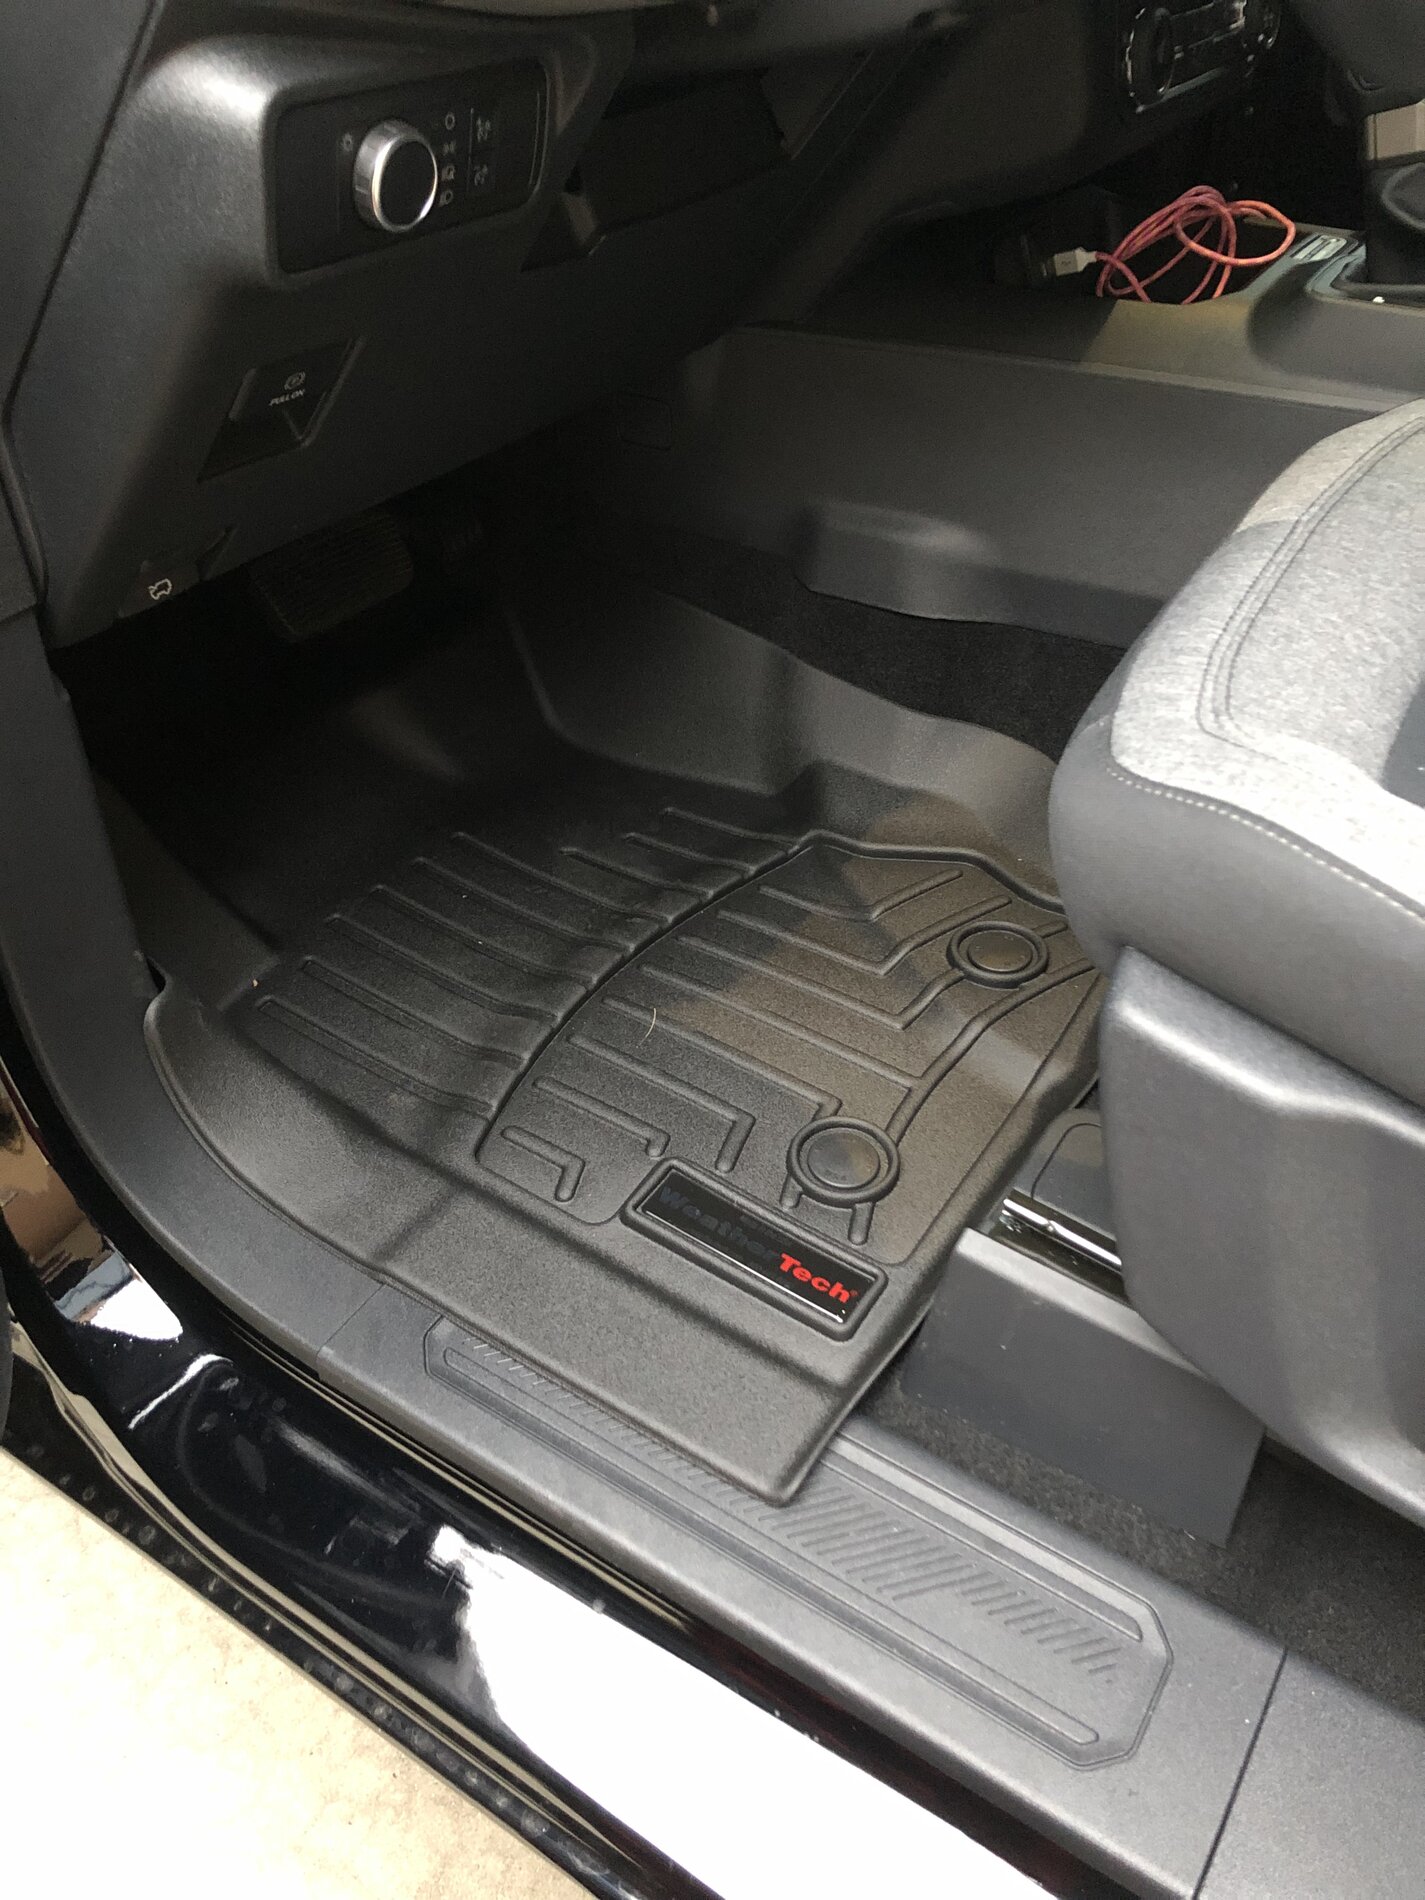 Ford Bronco Bronco Weathertech Floor Liners and Cargo Liners now available 9CA18756-9A76-4EBF-A019-F678234290C6